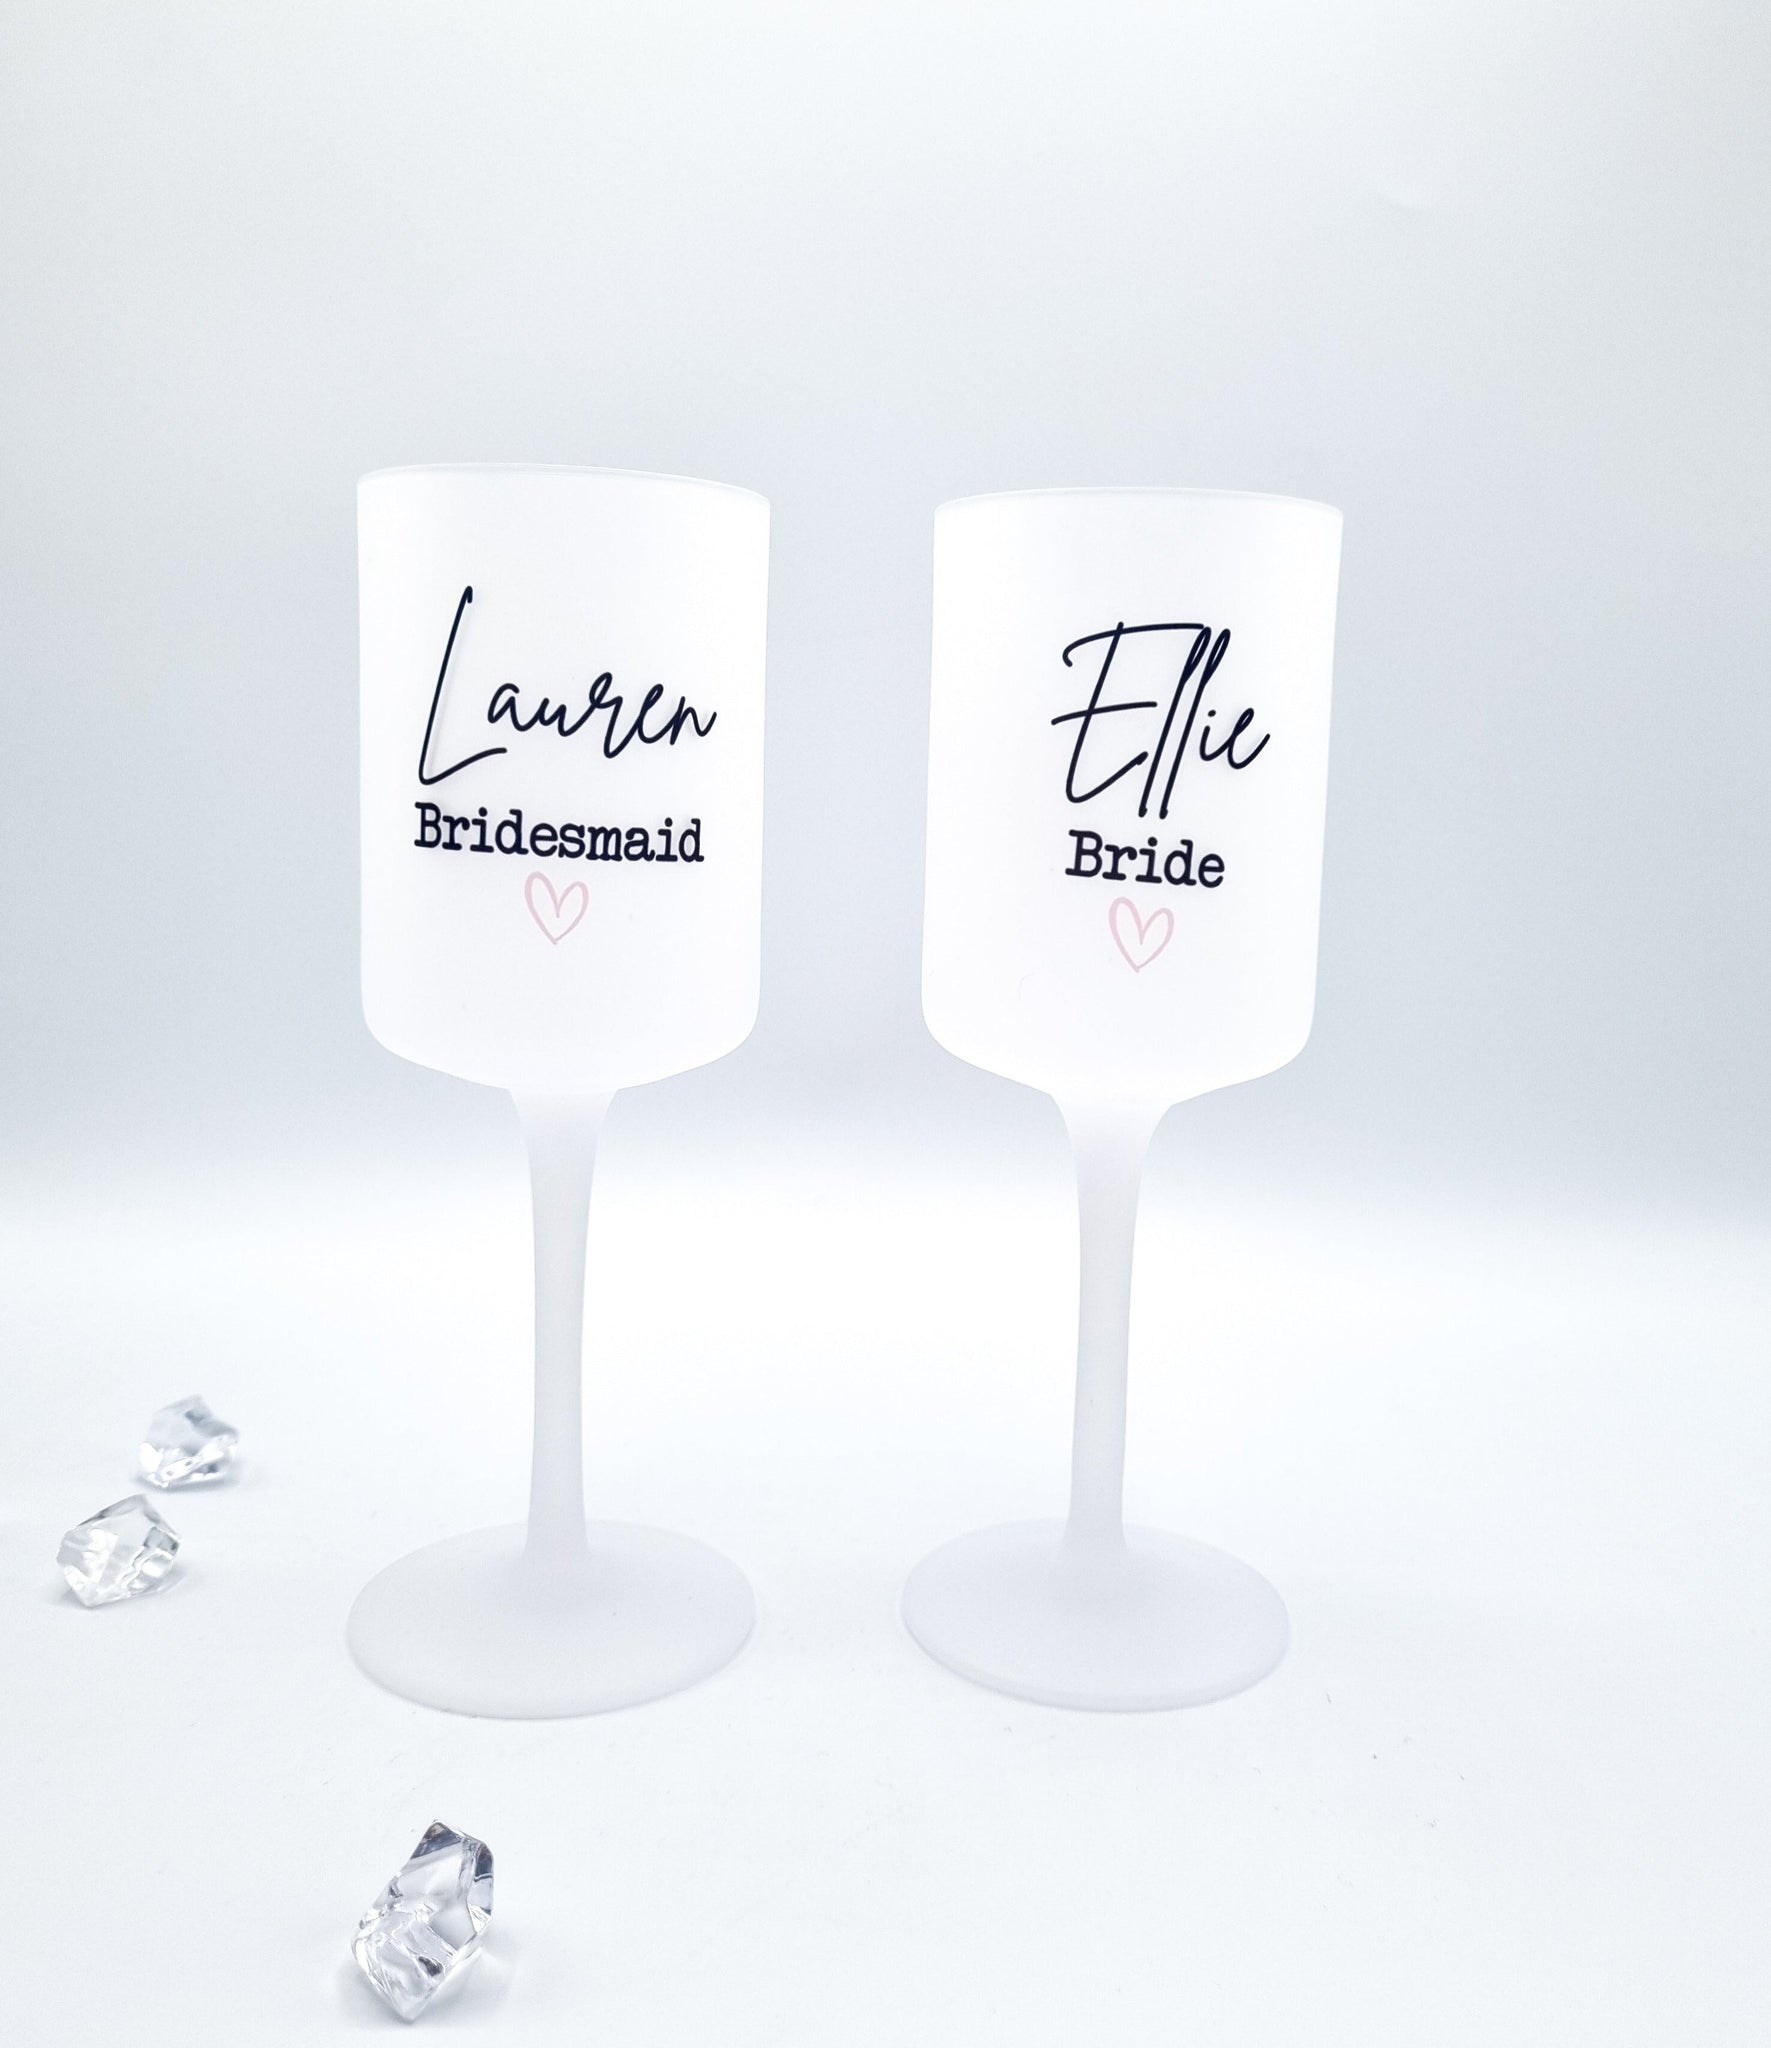 Two stunning frosted wine glasses with text personalisation